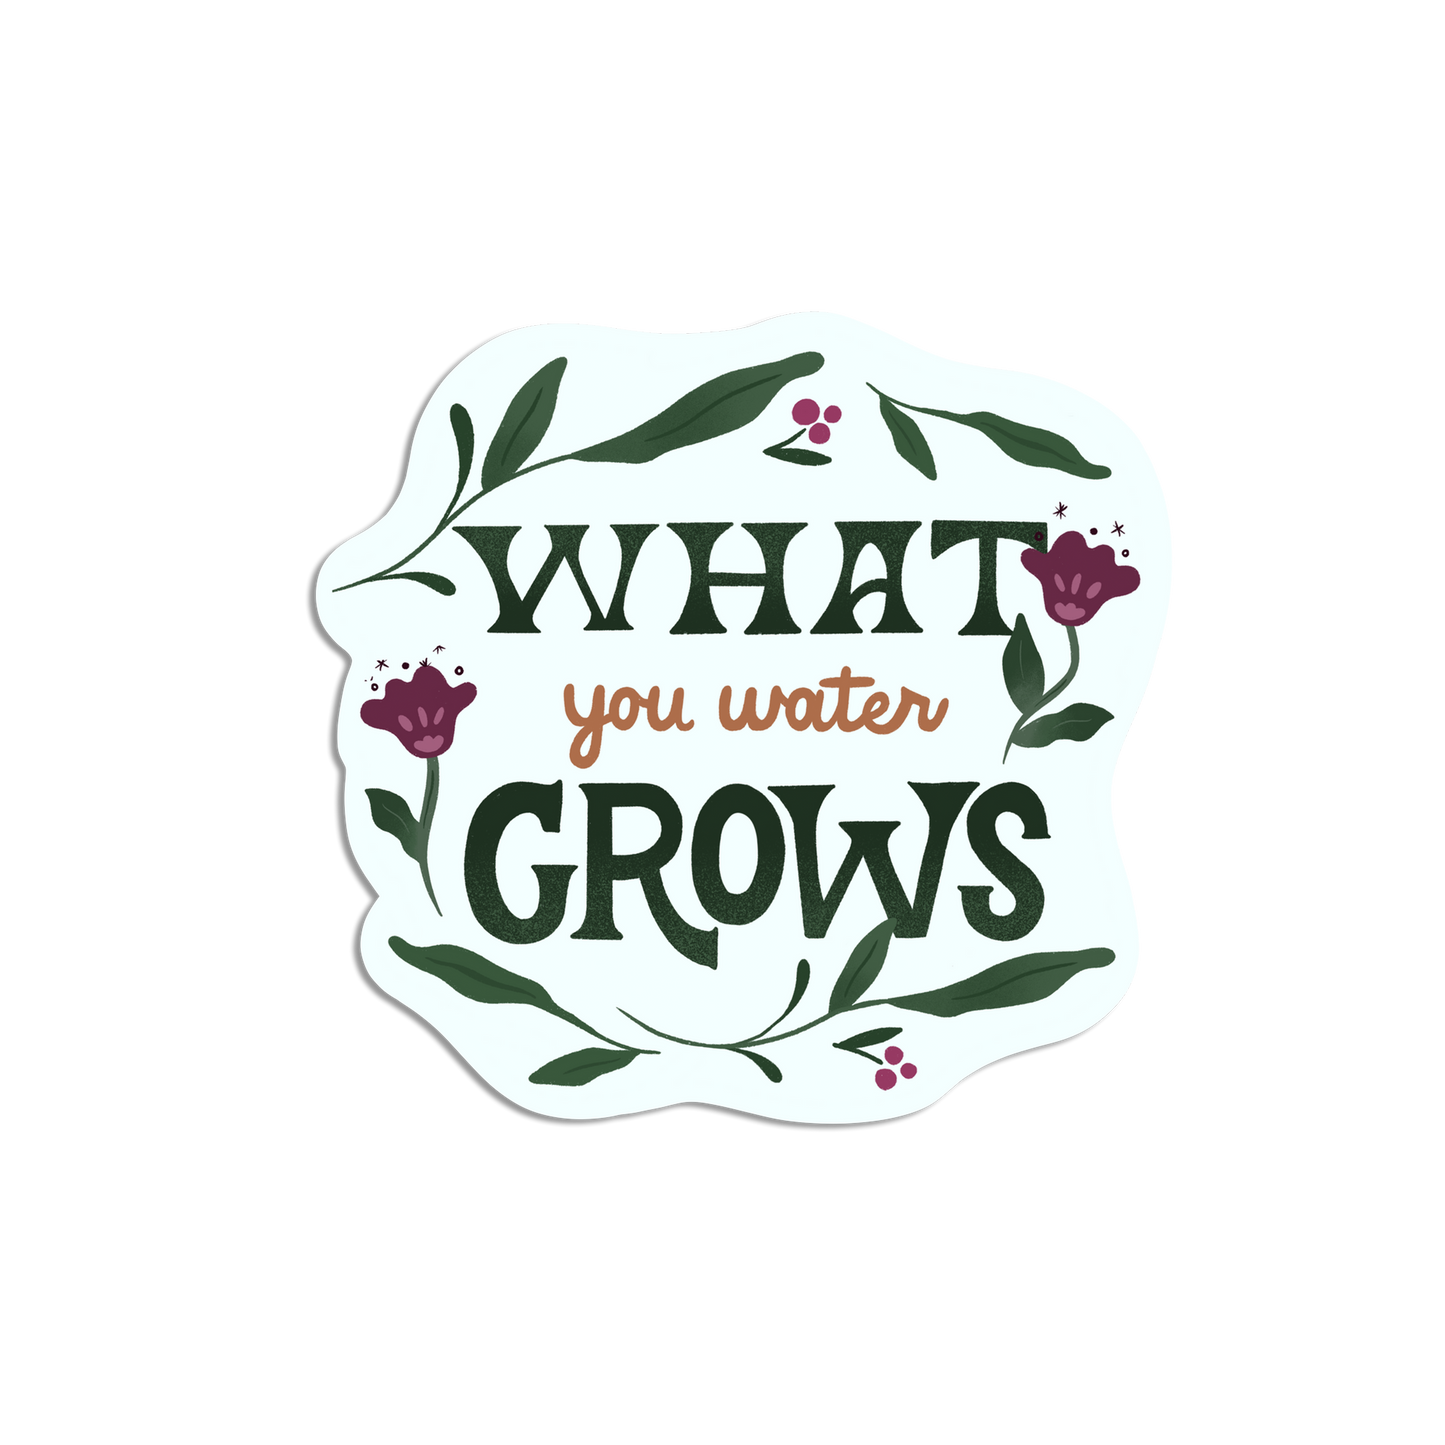 What You Water Grows Mental Health Encouraging Sticker